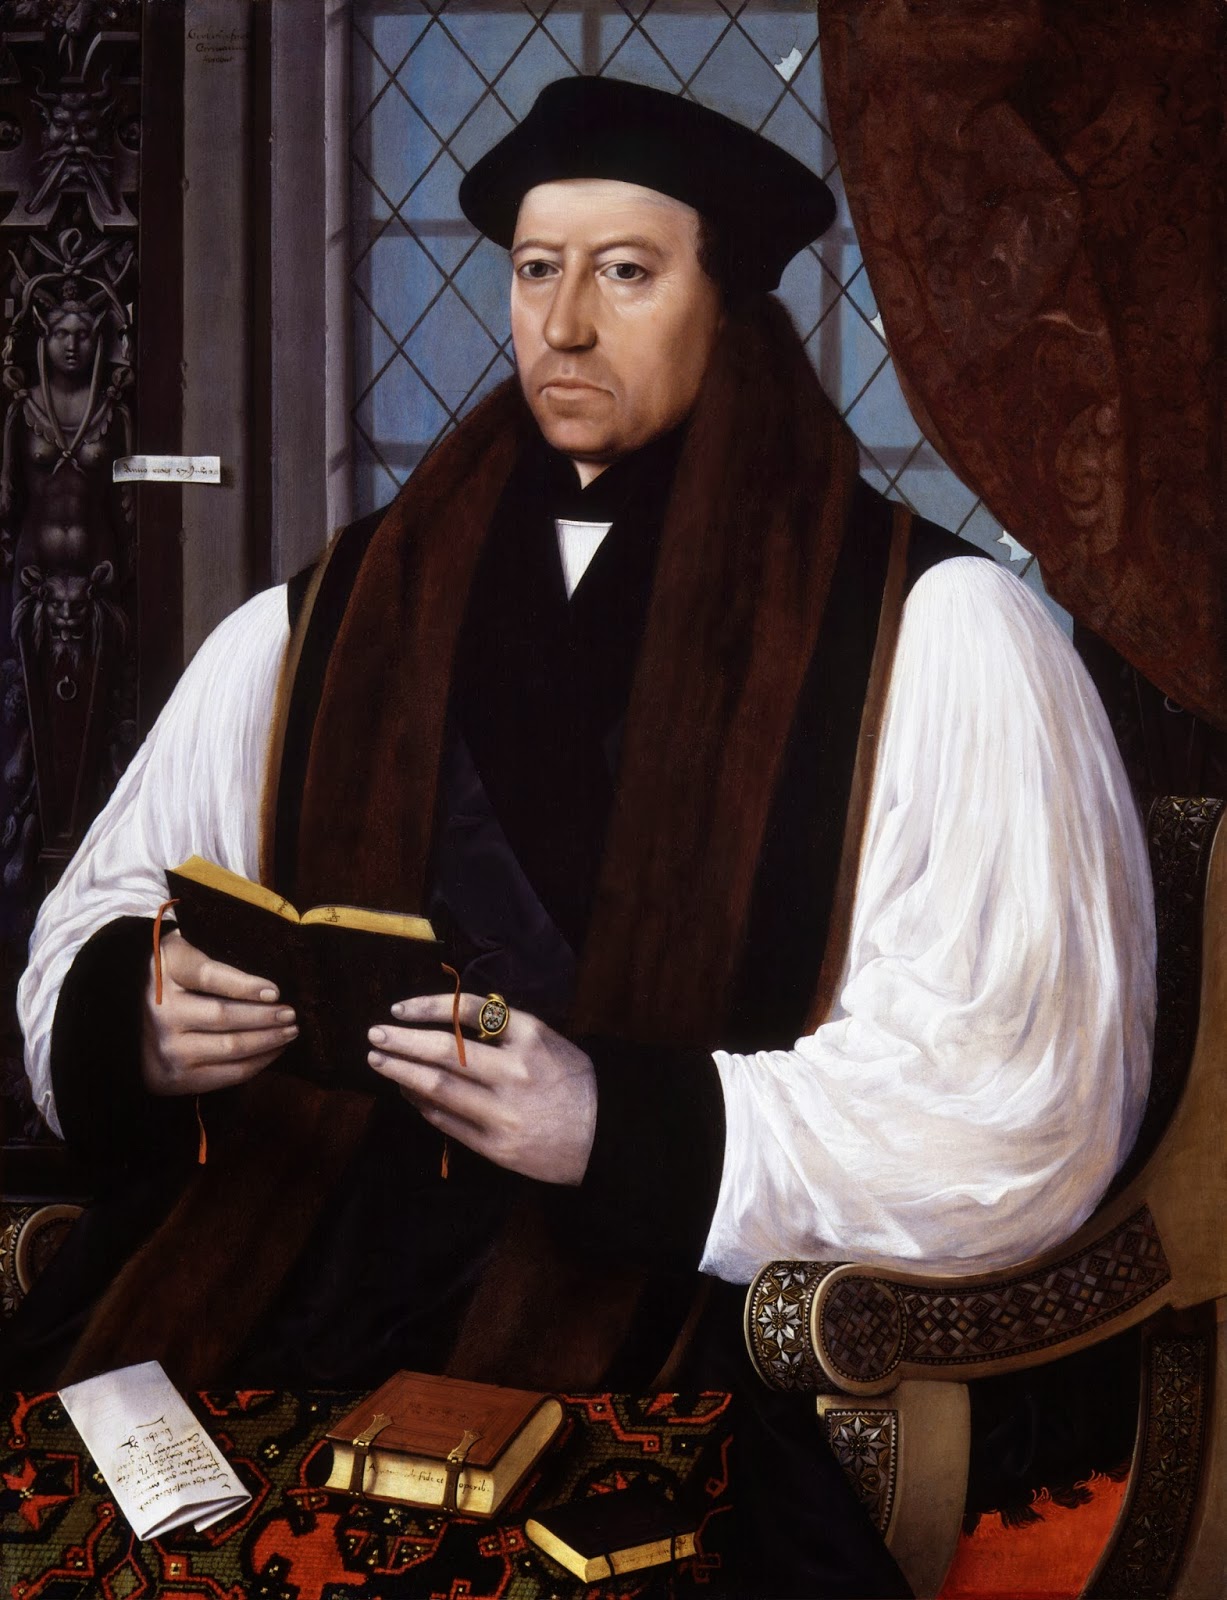 On June 15, 1540, Thomas Cranmer wrote a heartfelt letter in support of his friend, Thomas Cromwell. "Who shall Your Grace trust hereafter if you may not trust him?" Read it on www.janetwertman.com 